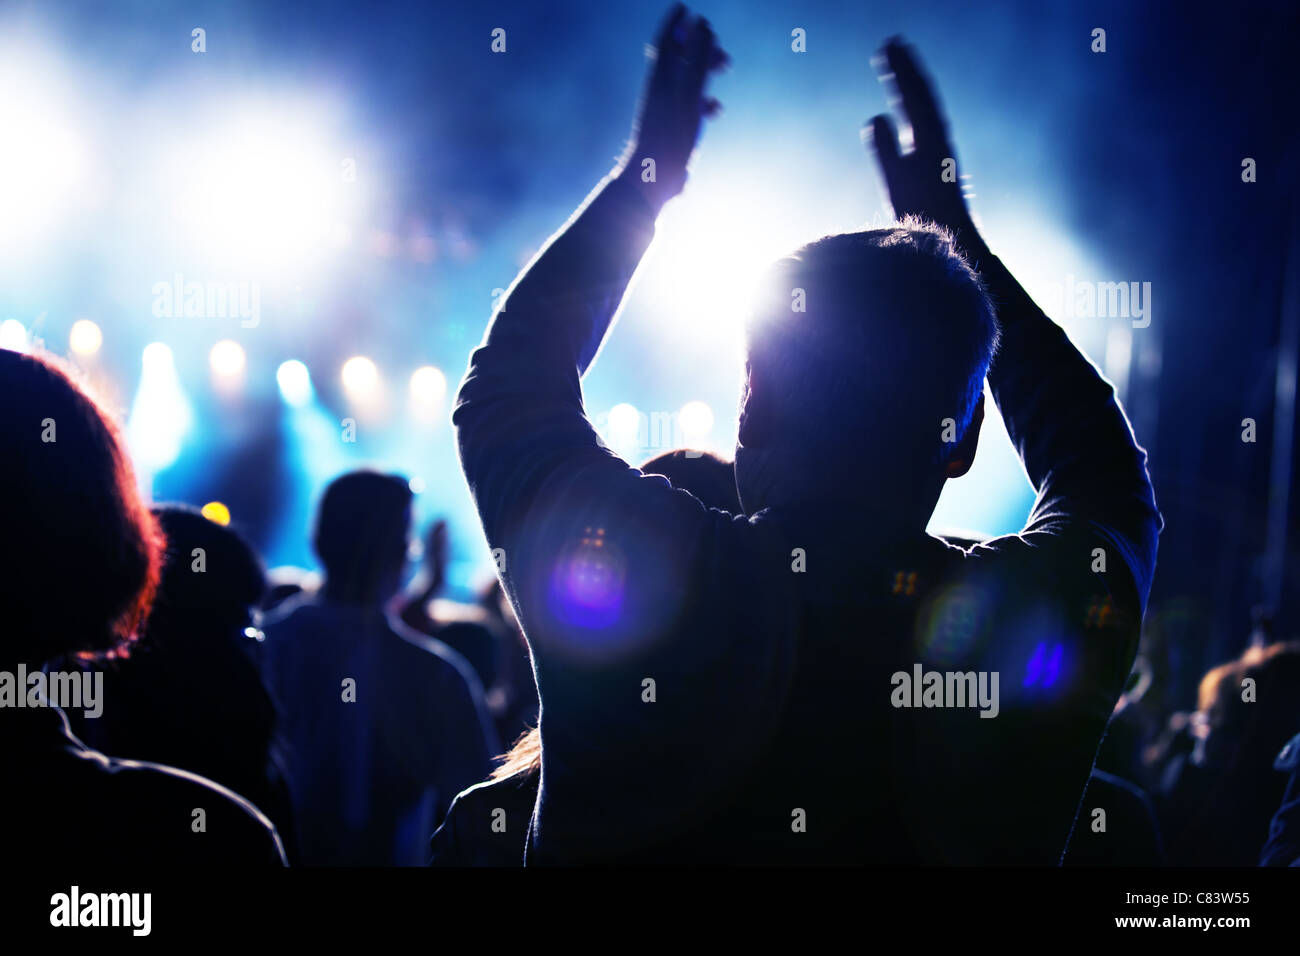 Crowds of people having fun on a music concert Stock Photo